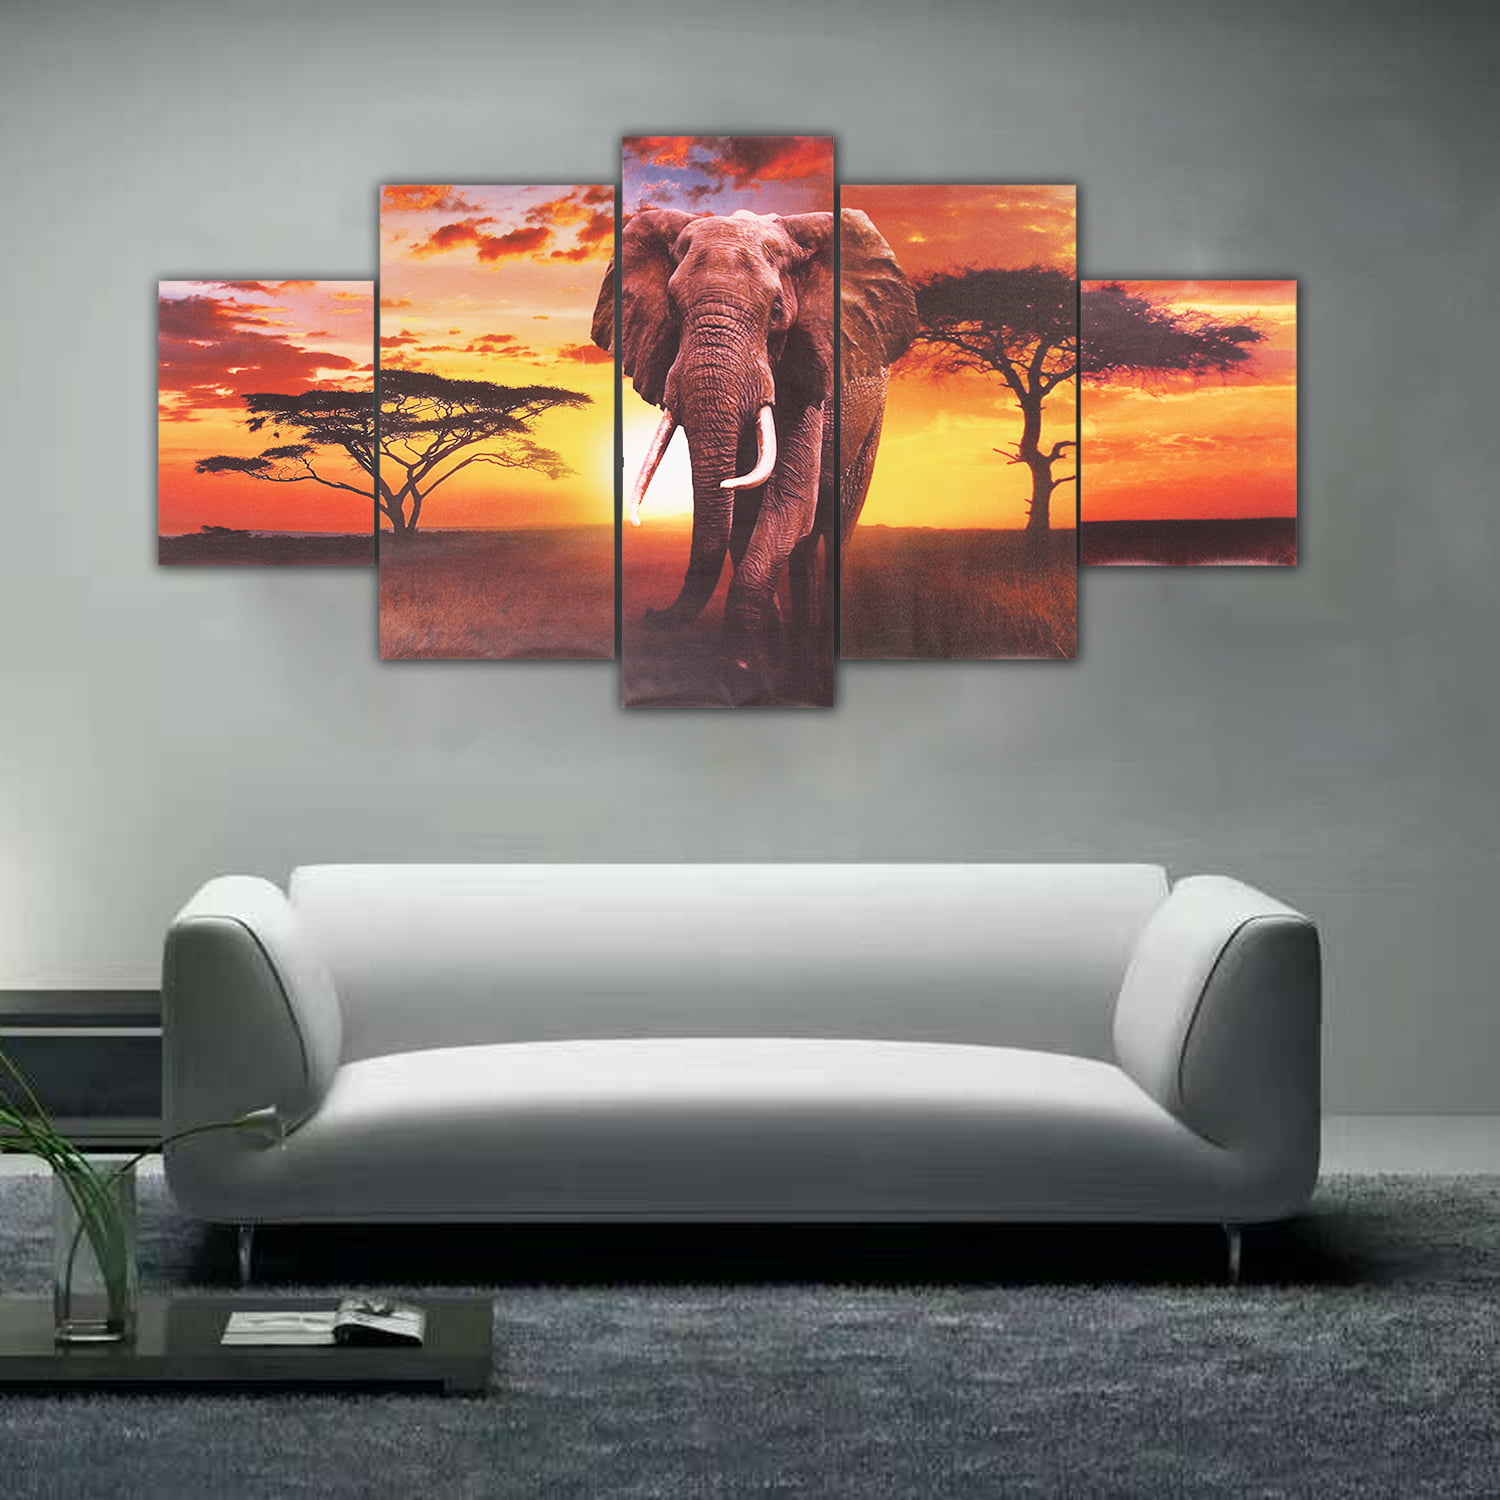 Unframed HD Canvas Prints Home Decor Wall Art Painting Picture-Elephants Best